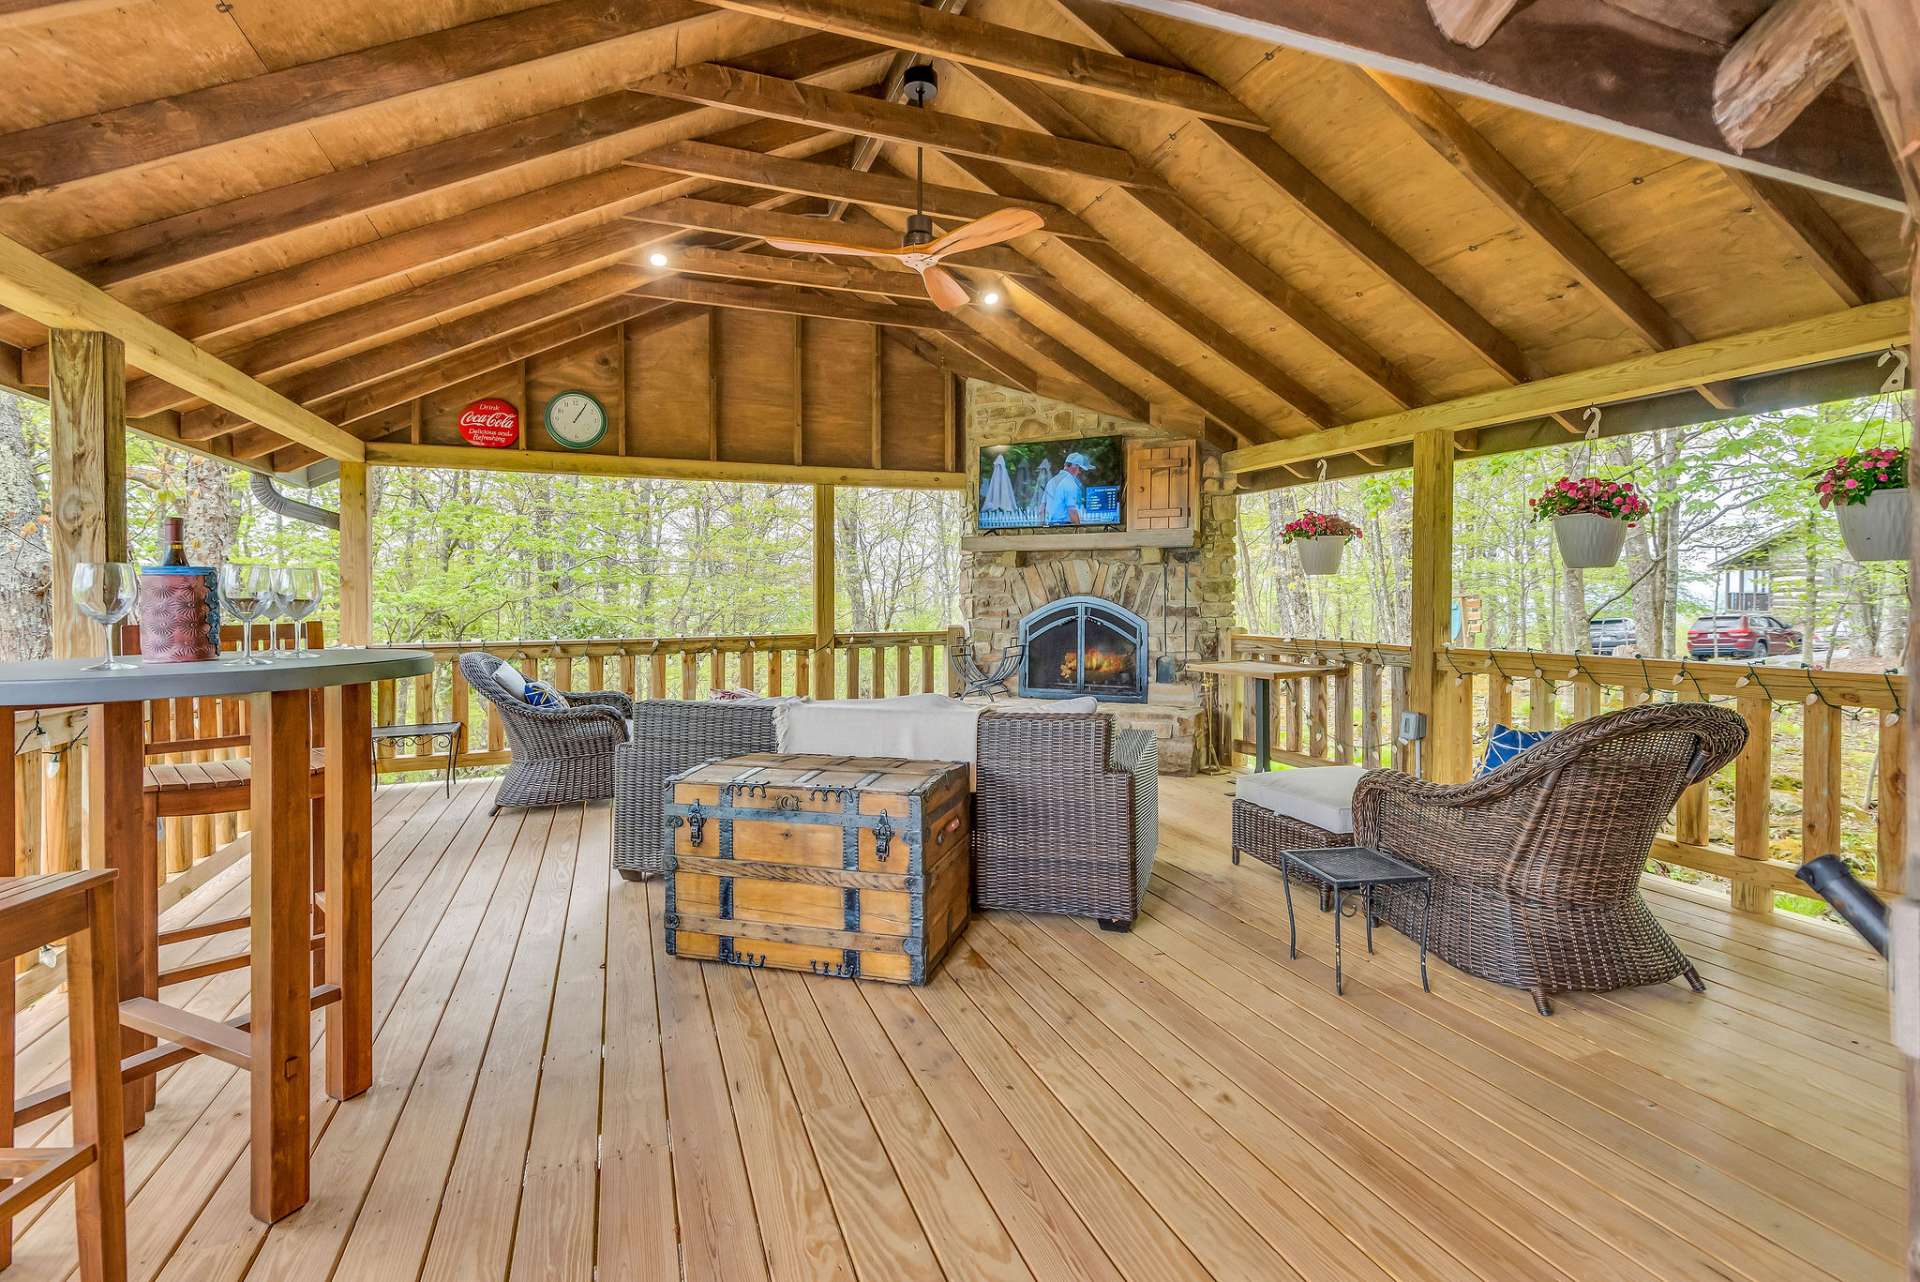 Enjoy hosting neighborhood parties or relaxing in front of the fire while breathing in the fresh mountain air outdoors in the expansive side covered porch with fireplace.